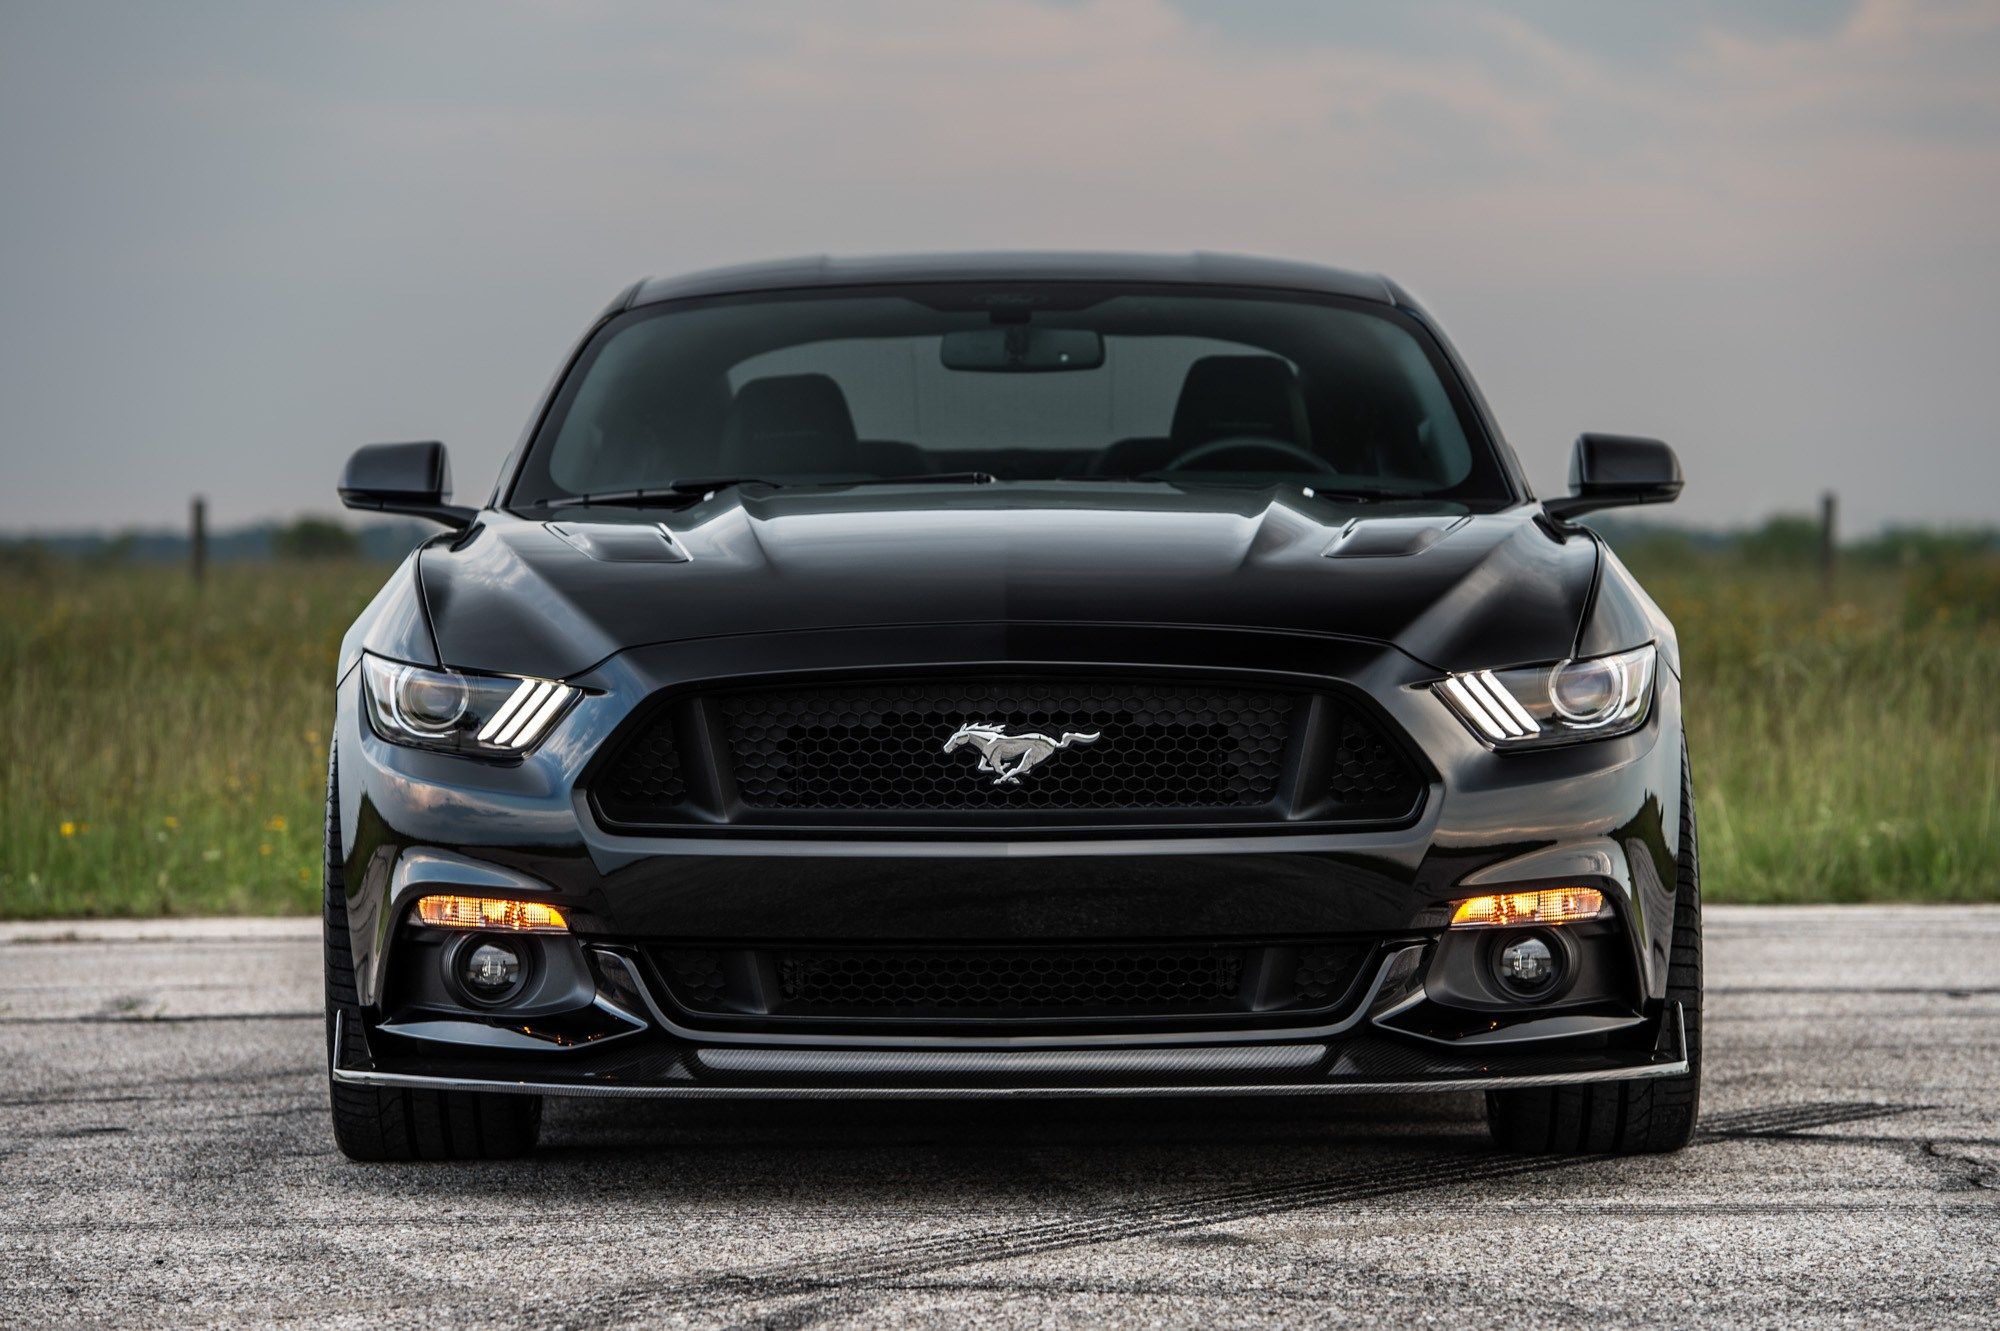 2016 Ford Mustang GT 25th Anniversary HPE800 Edition By Hennessey